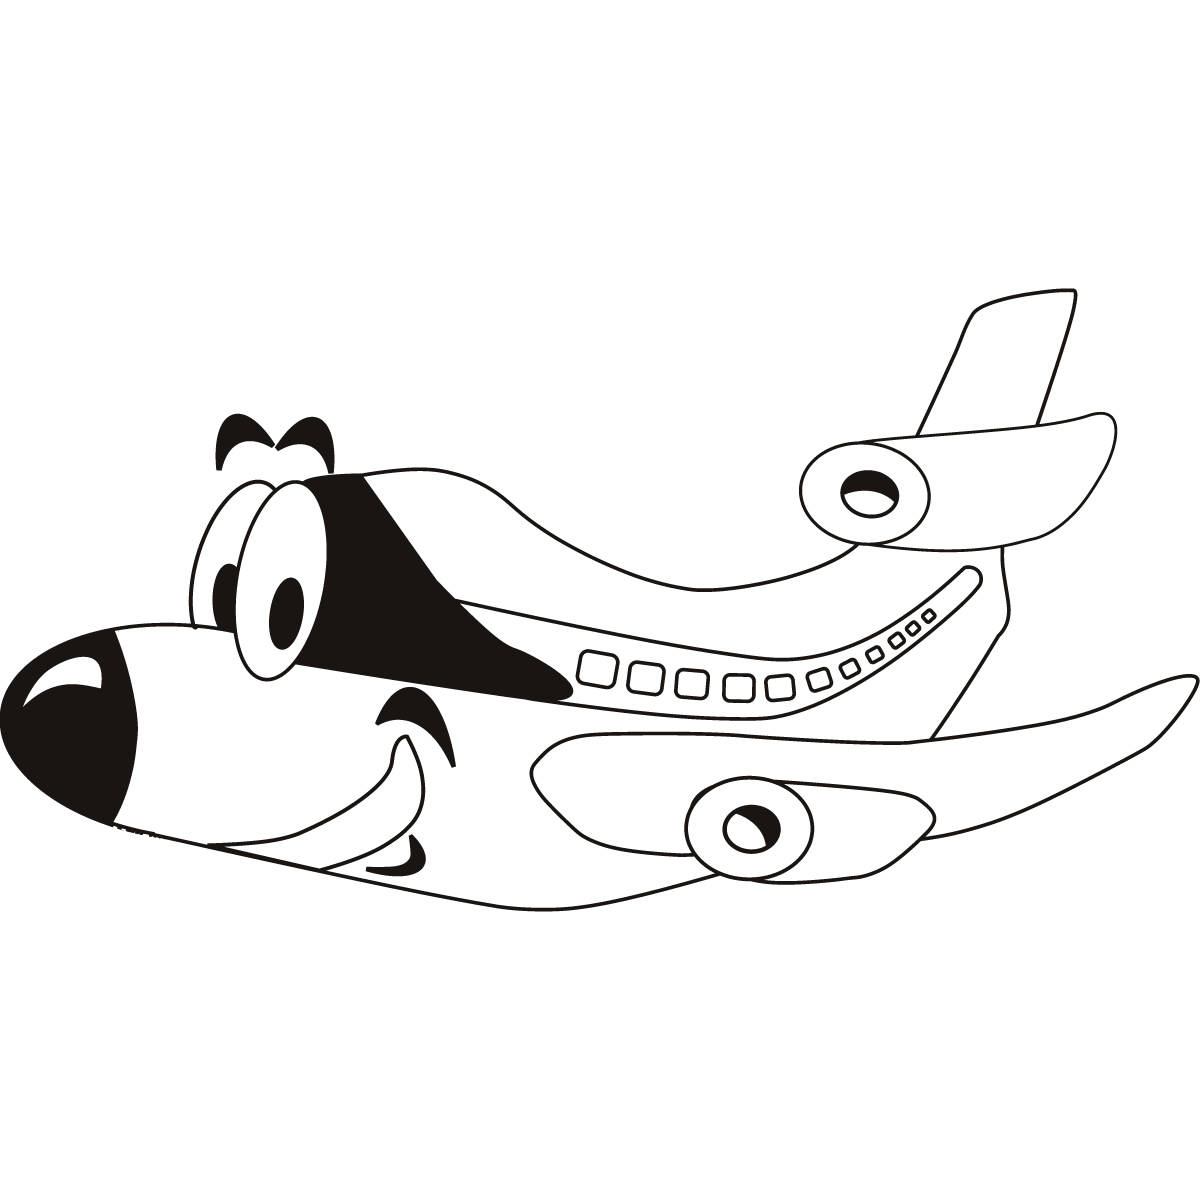 airplane cartoon - Favourite Pictures